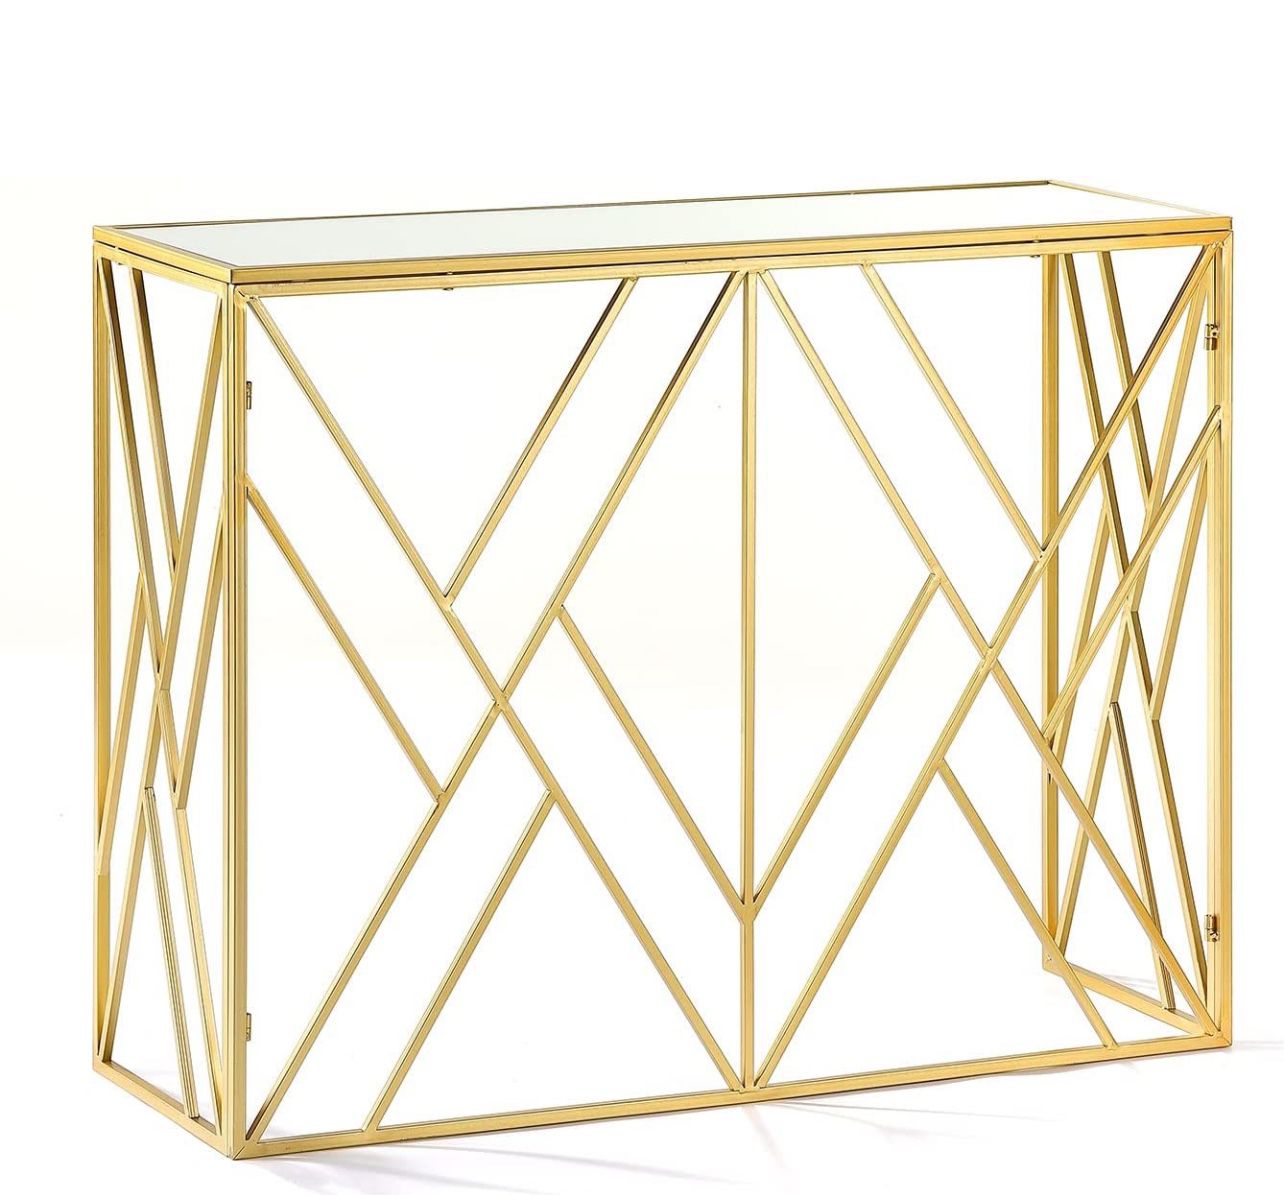 YiLifebes Modern Glass Console Table, 40" Gold Sofa Table with Sturdy Metal Frame and Mirror Tempered Glass Top, for Living Room Entryway Bedroom, Gol